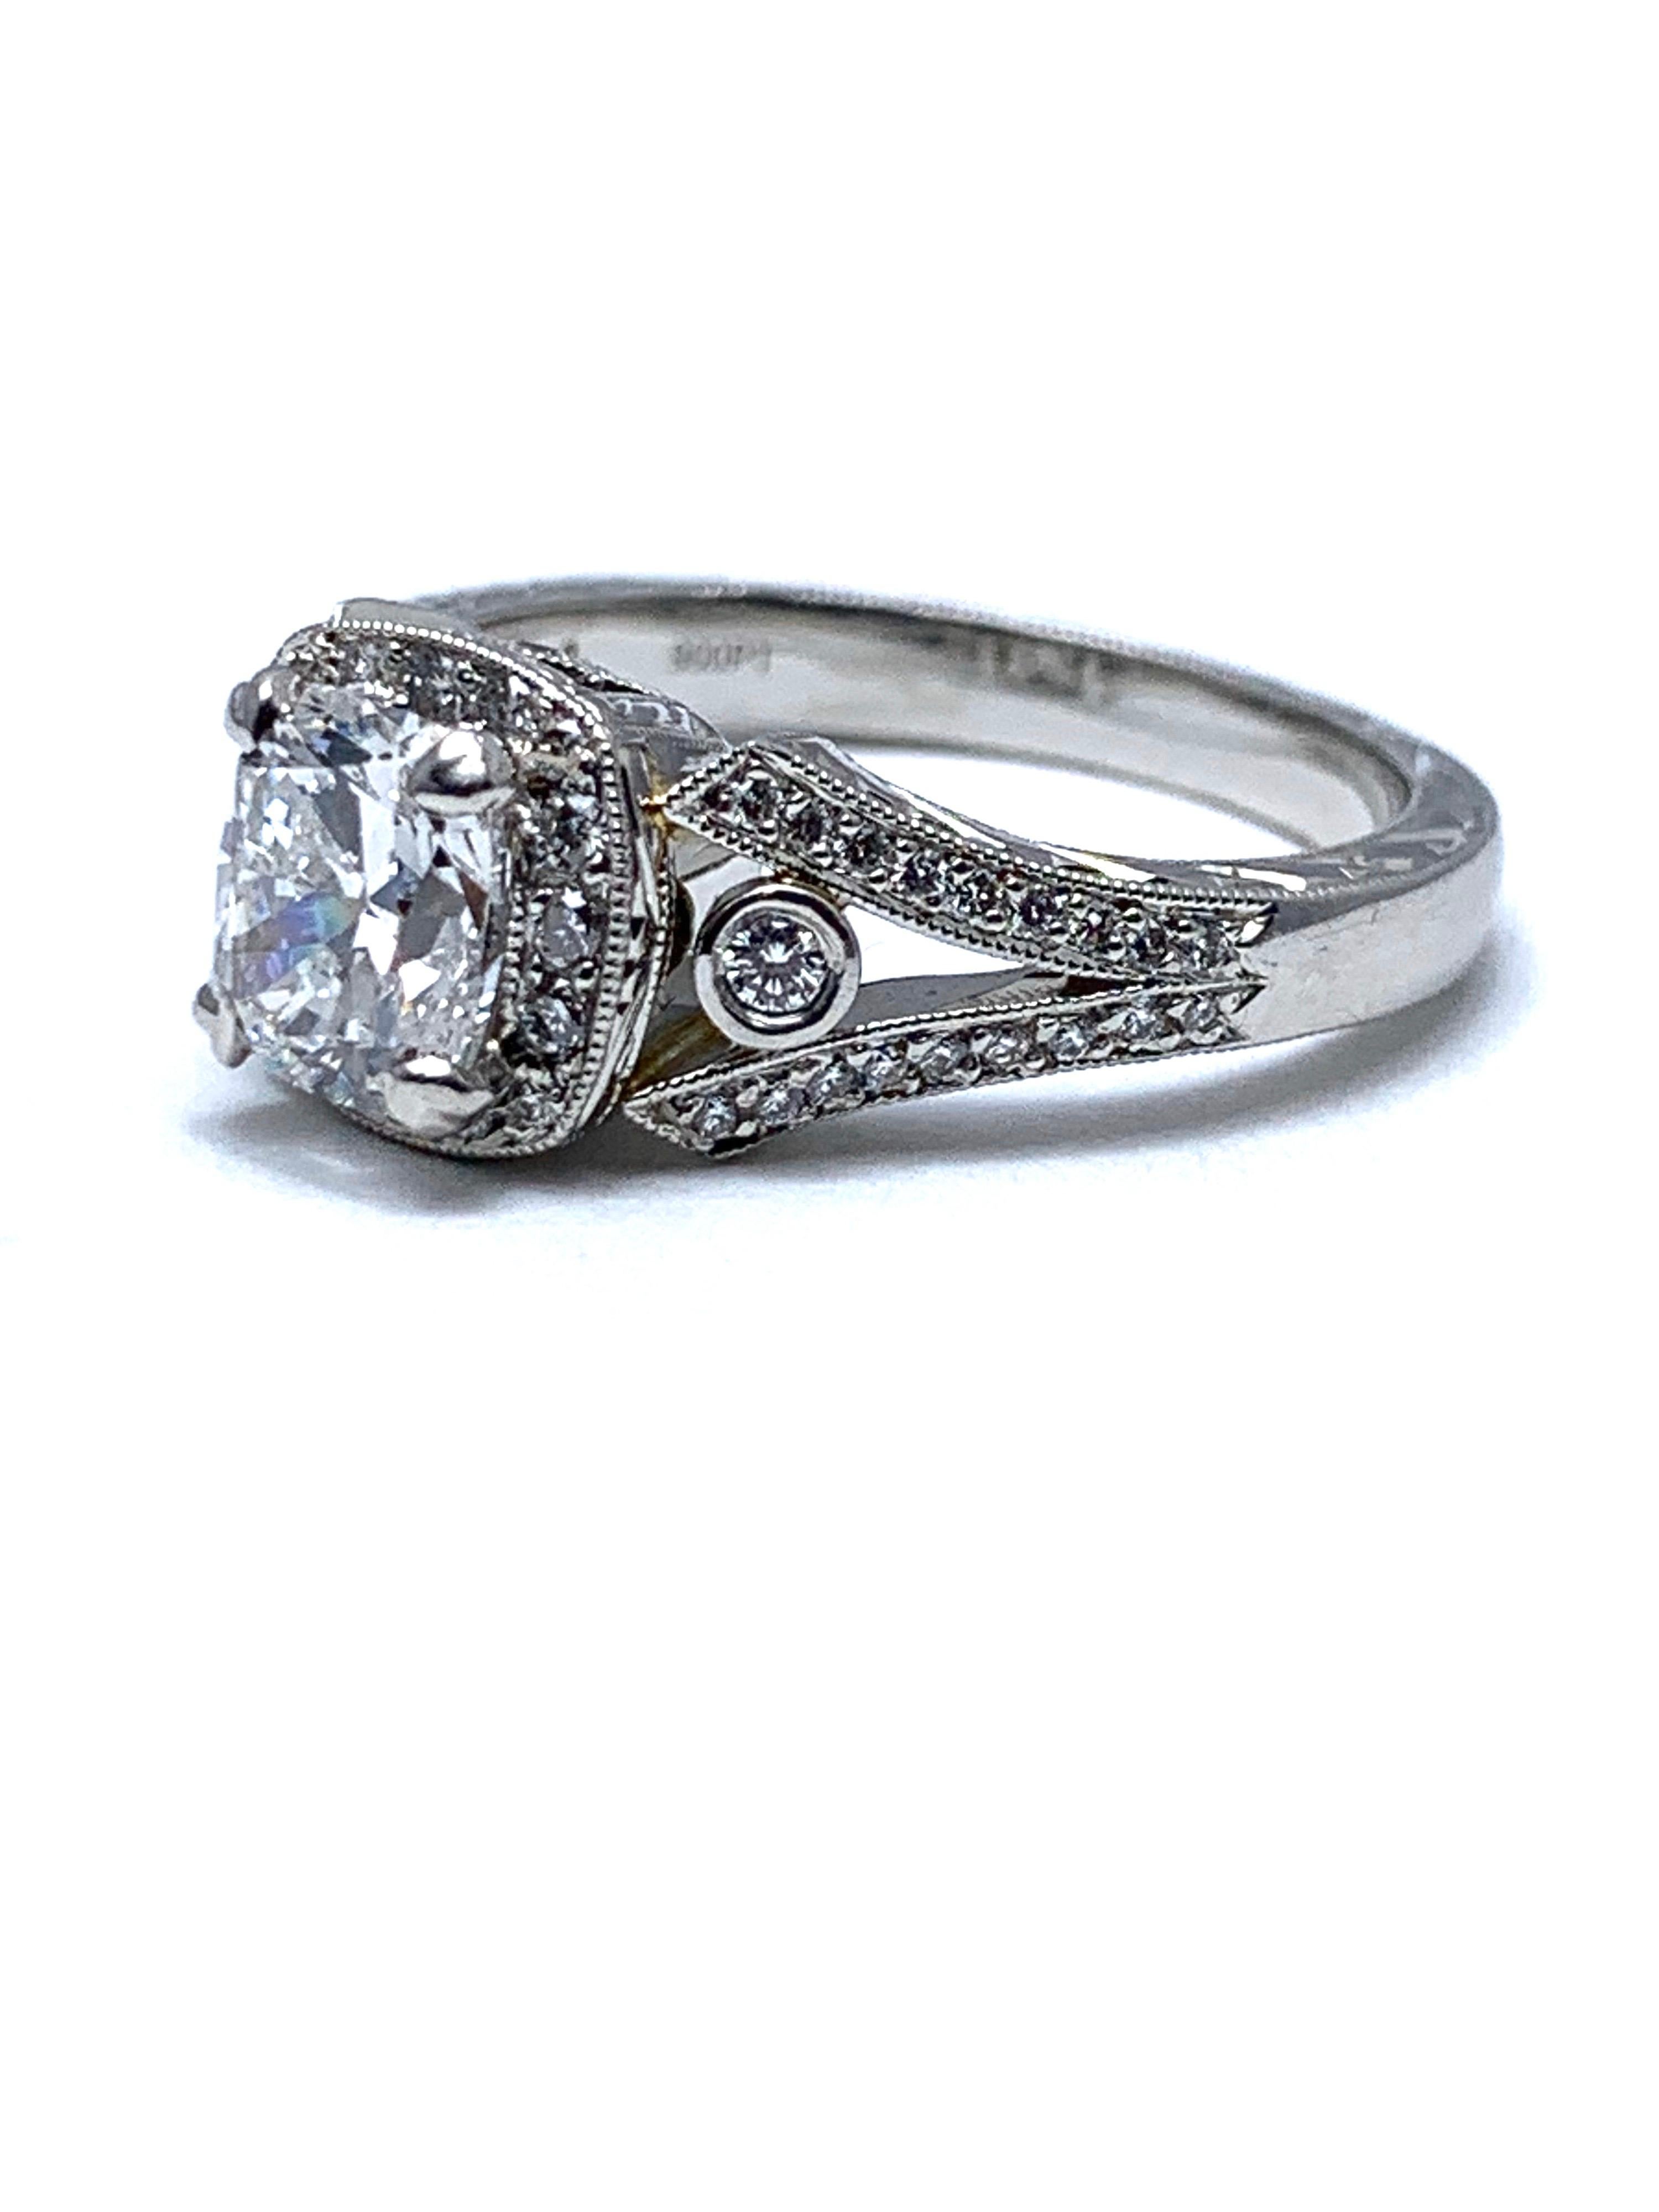 Women's or Men's 1.03 Carat D/SI1 Diamond with Diamond Halo and Hand Engraved Platinum Ring For Sale